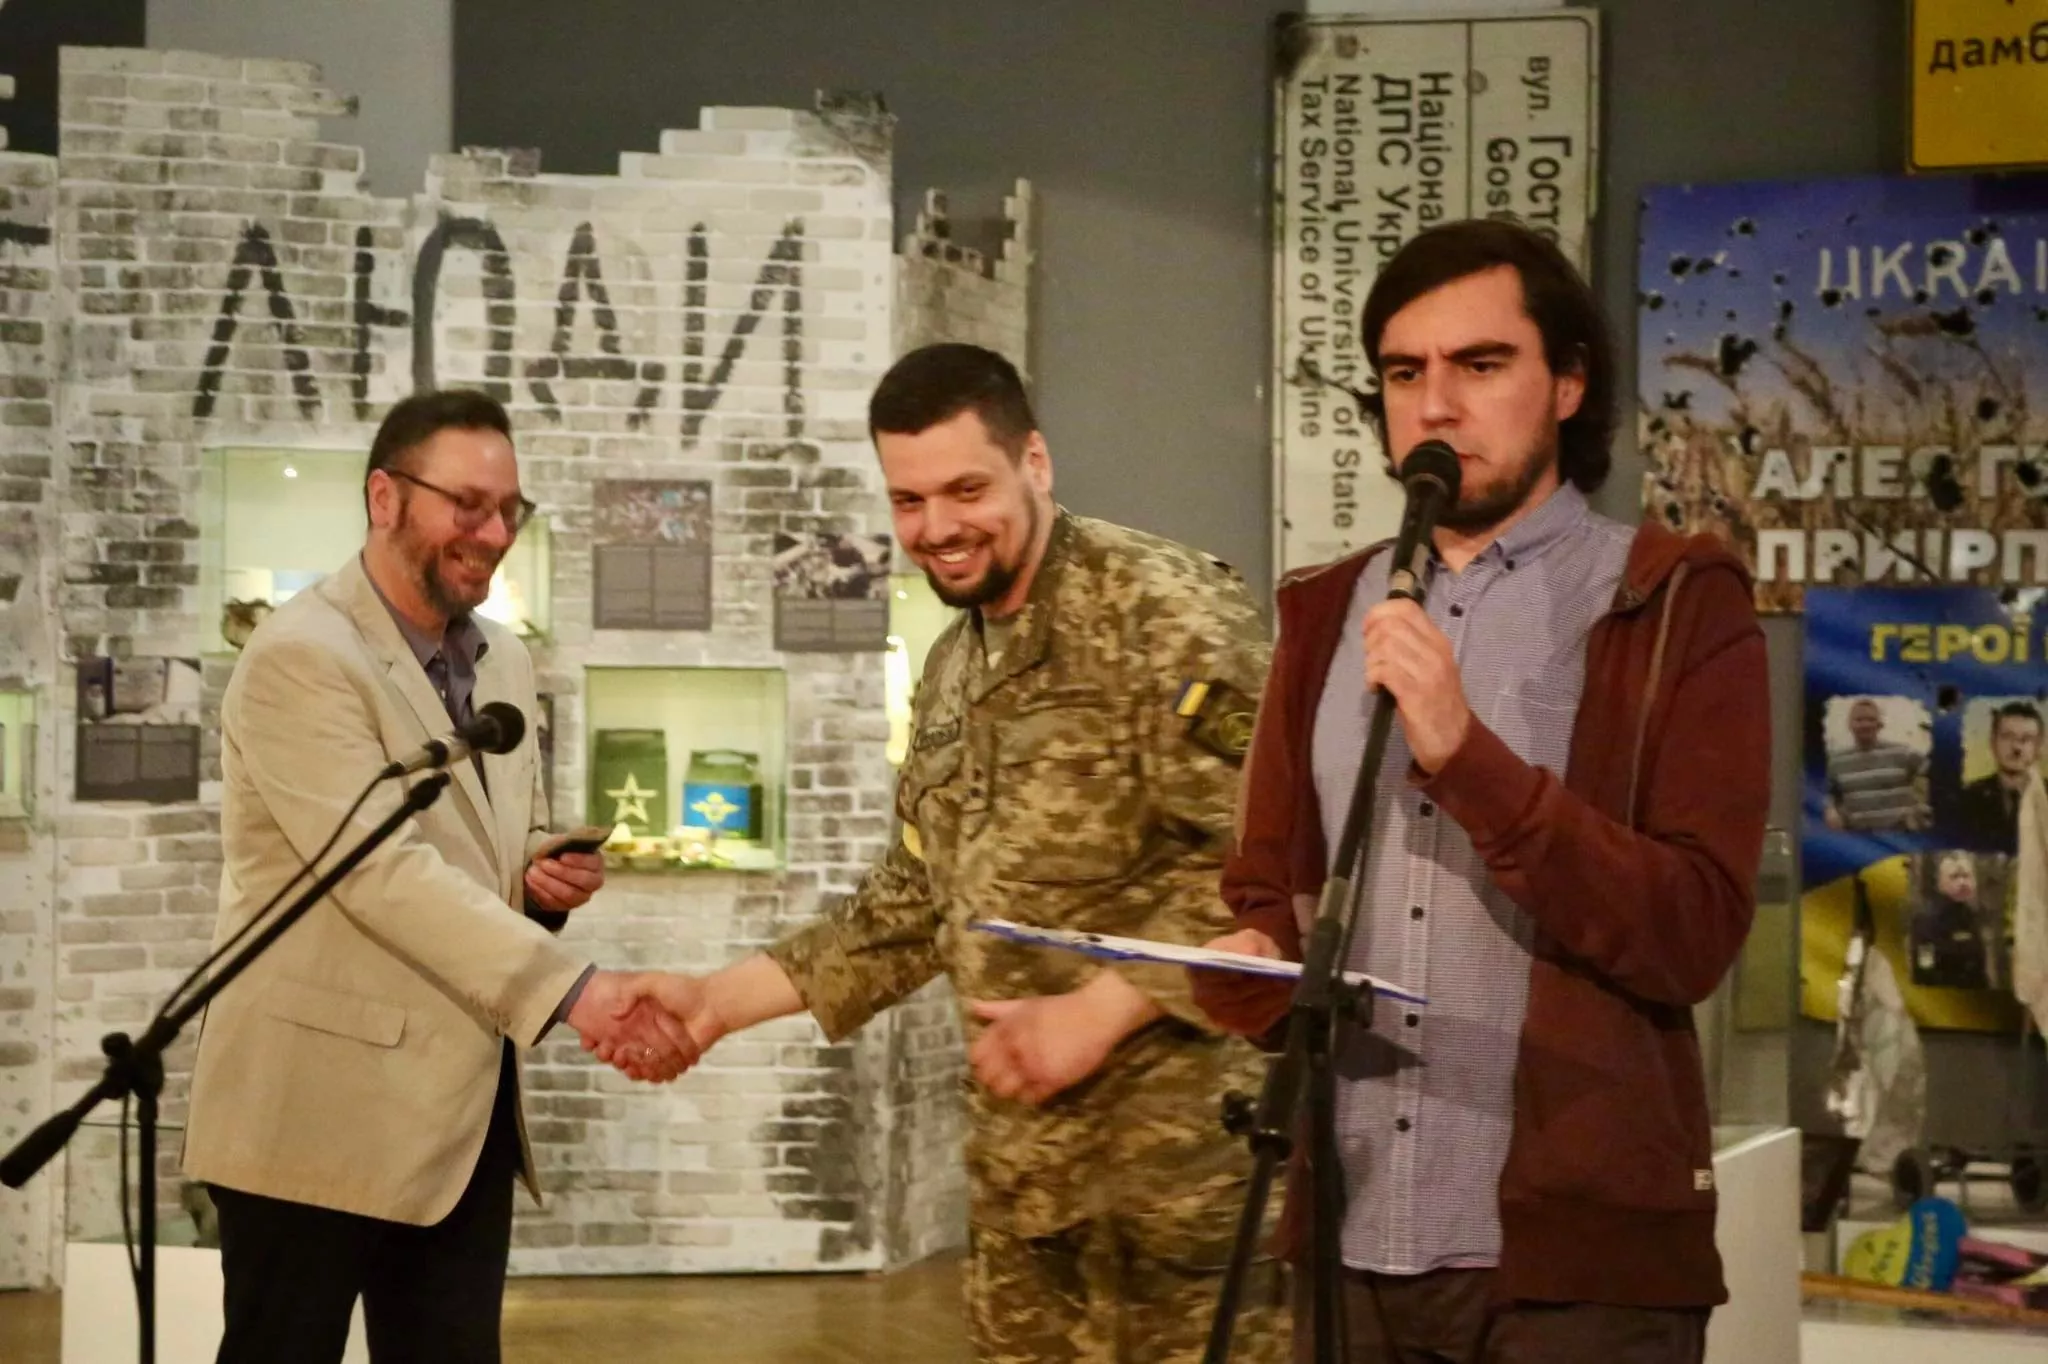 Opening of the exhibition "Invasion. Kyiv shot." In the center – Andiy Kovaliovv, press officer of Kyiv Territorial Defense. Photo by Euromaidan Press